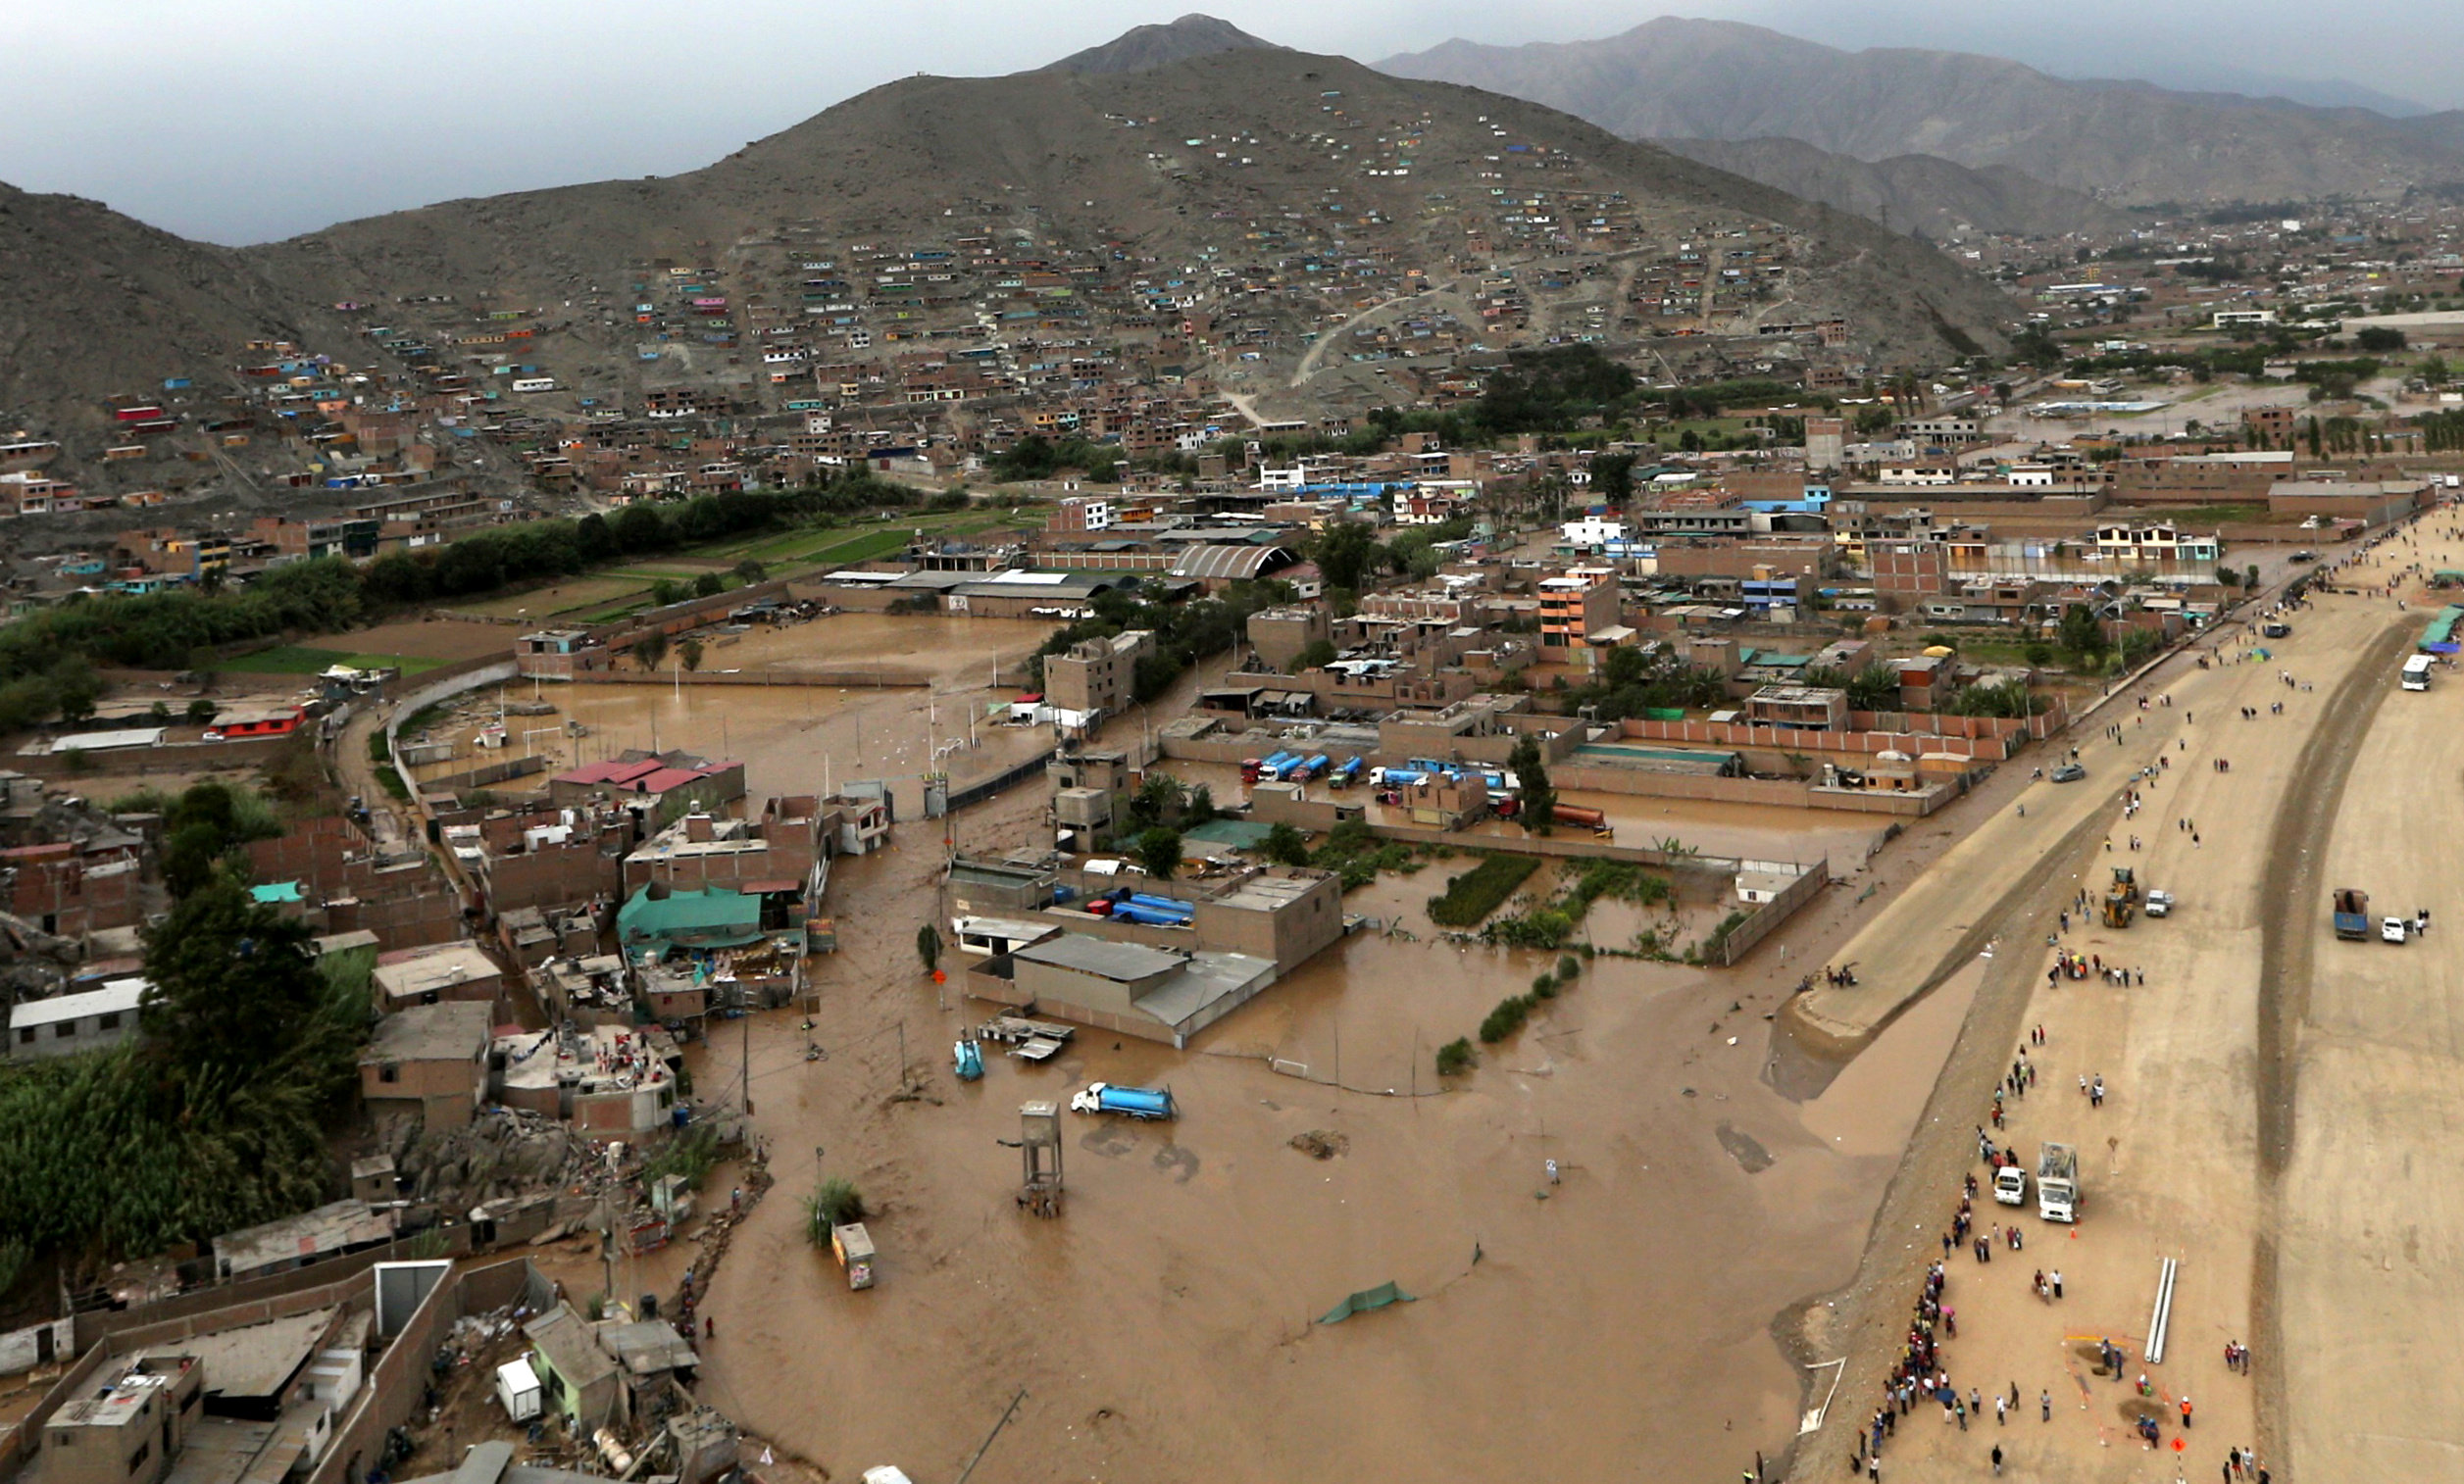 Aerial view after a massive landslide and flood in the Huachipa district of Lima, Peru, March 17, 2017. REUTERS/Guadalupe Pardo TPX IMAGES OF THE DAY